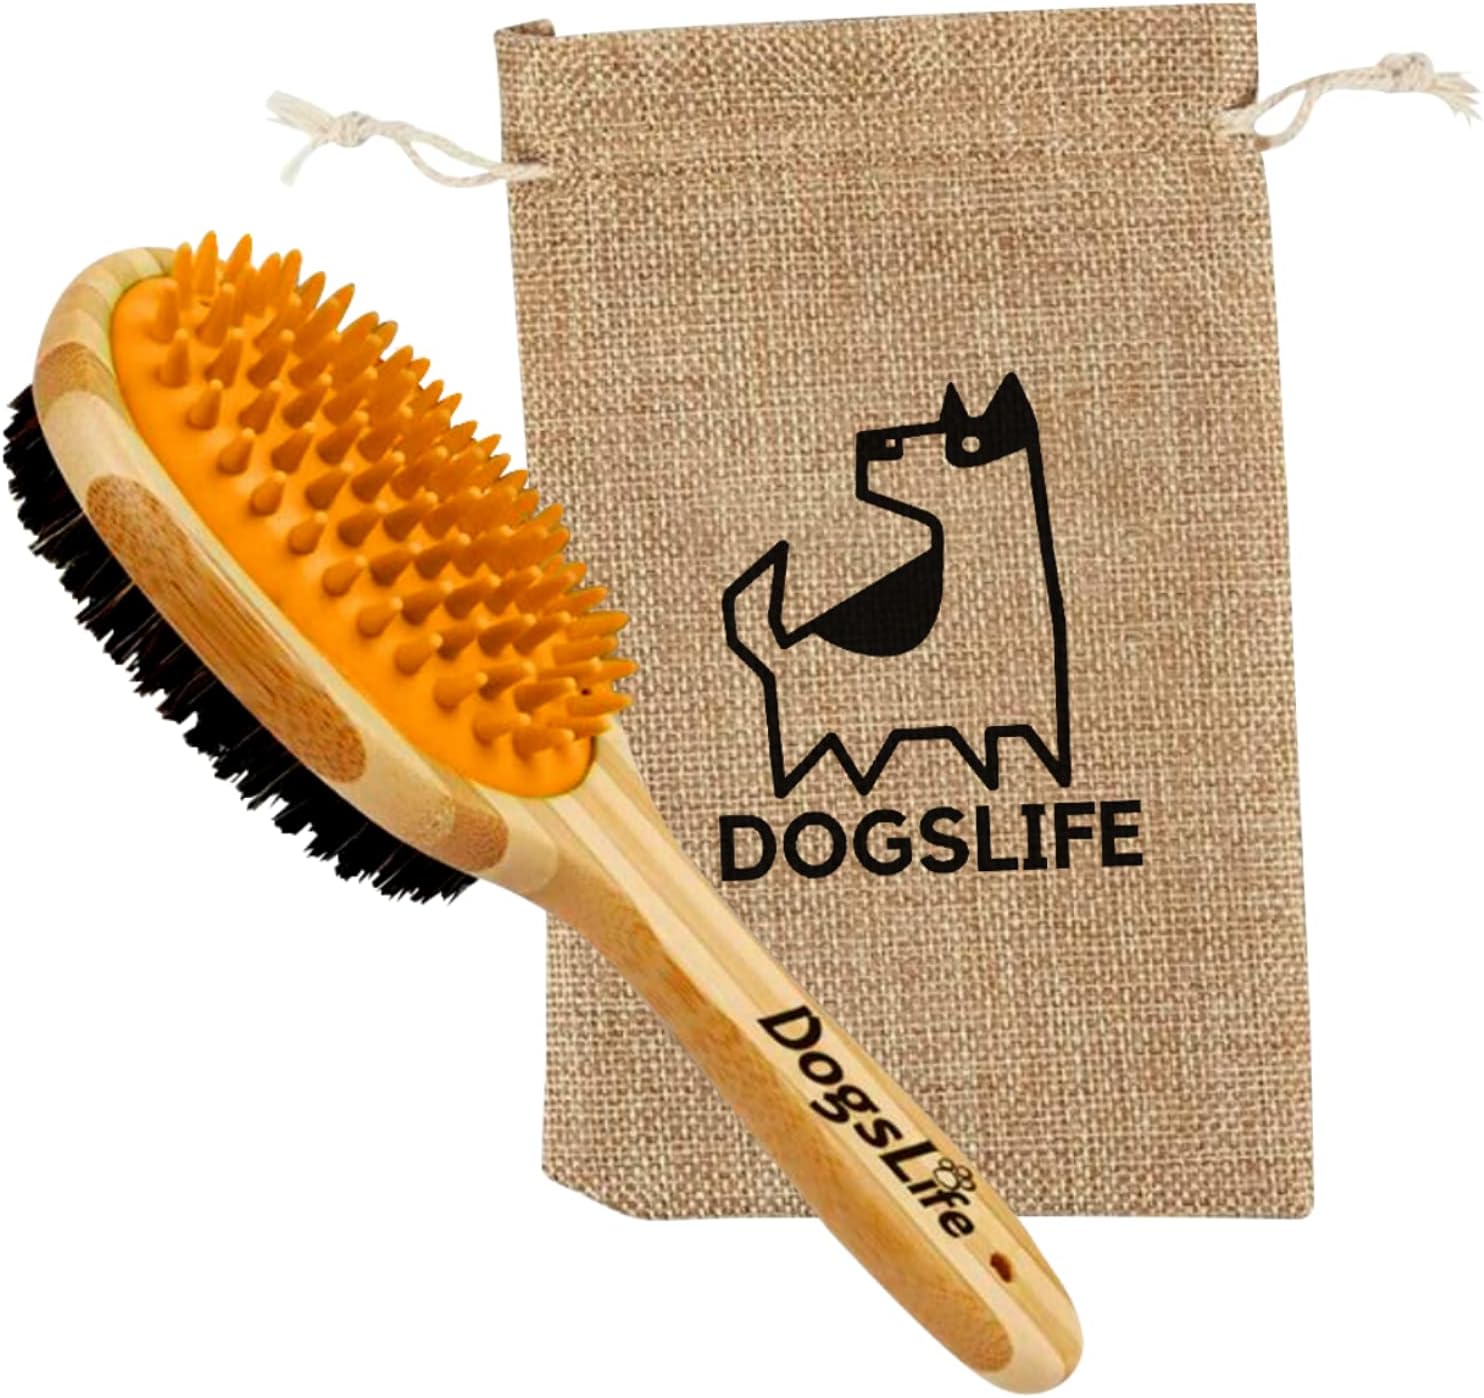 Bamboo Dog Brush with Silicone Massager for Dog Grooming | Massaging & Bathing | Free Reusable Eco-friendly Bag | Proven Double Sided Pet Brush Perfect For Long, Medium & Short Haired Dogs.…